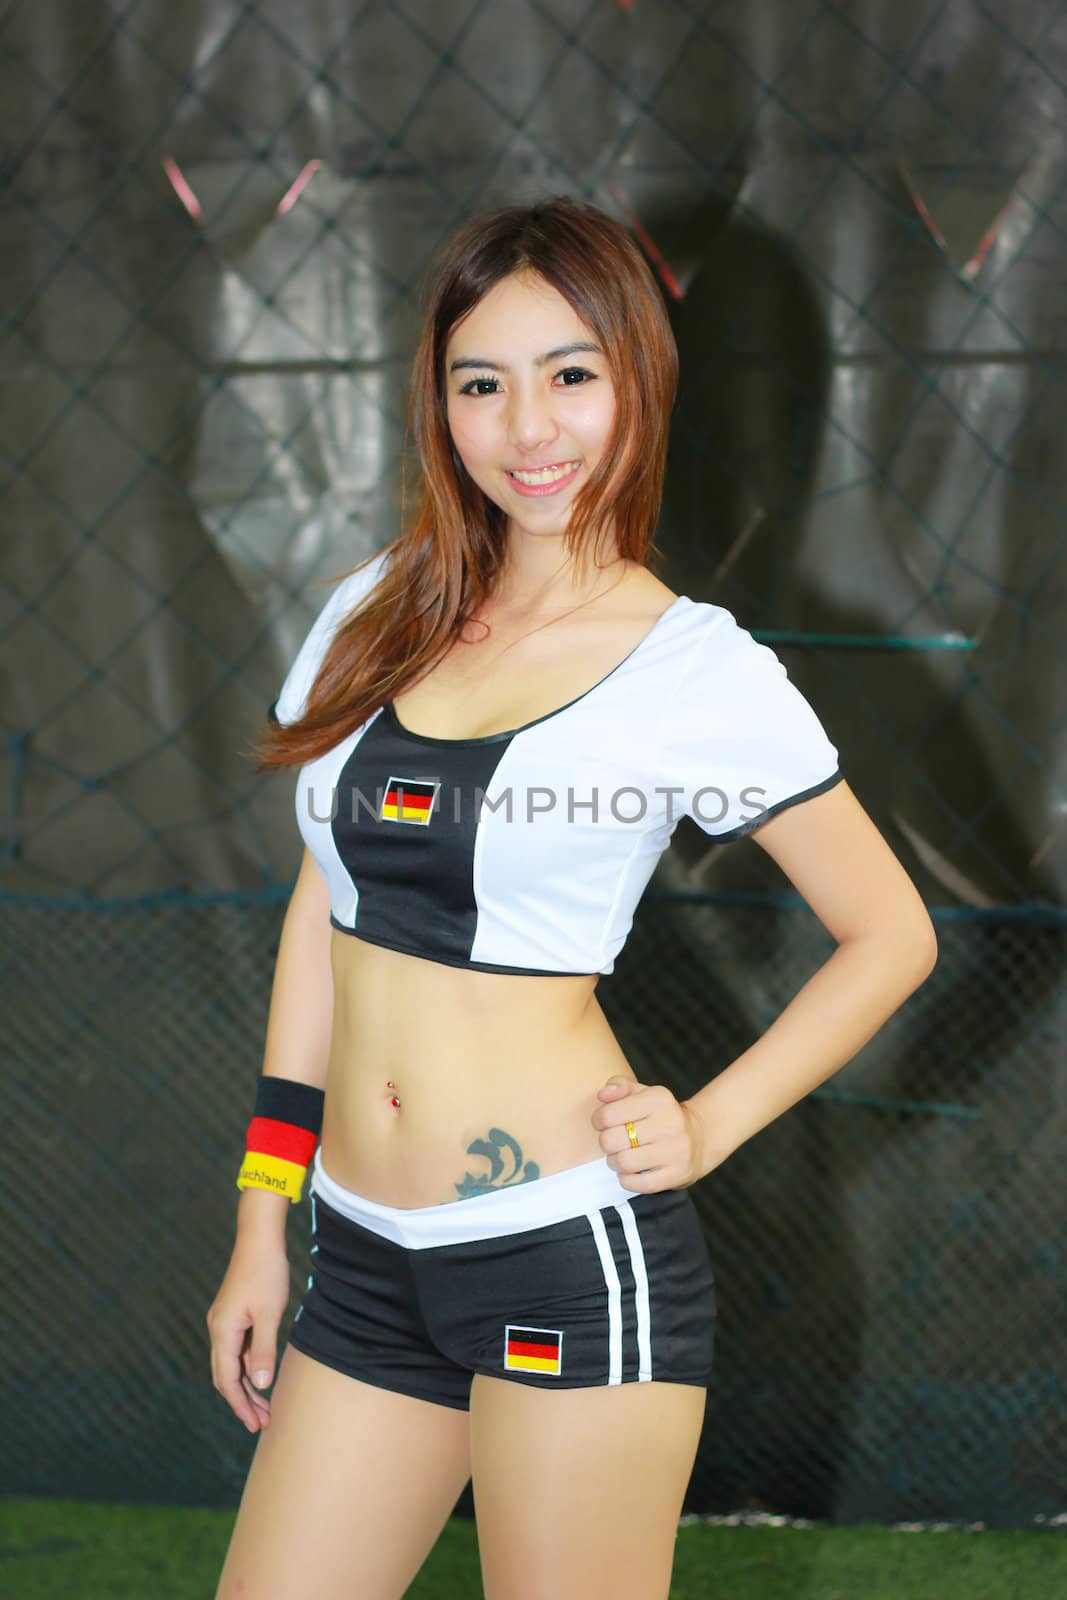 BANGKOK, THAILAND - JUNE 29, 2014: Unidentified model with Germany  costume pose for promote World Cup 2014 in futsal park on June 29, 2014 in Bangkok, Thailand.